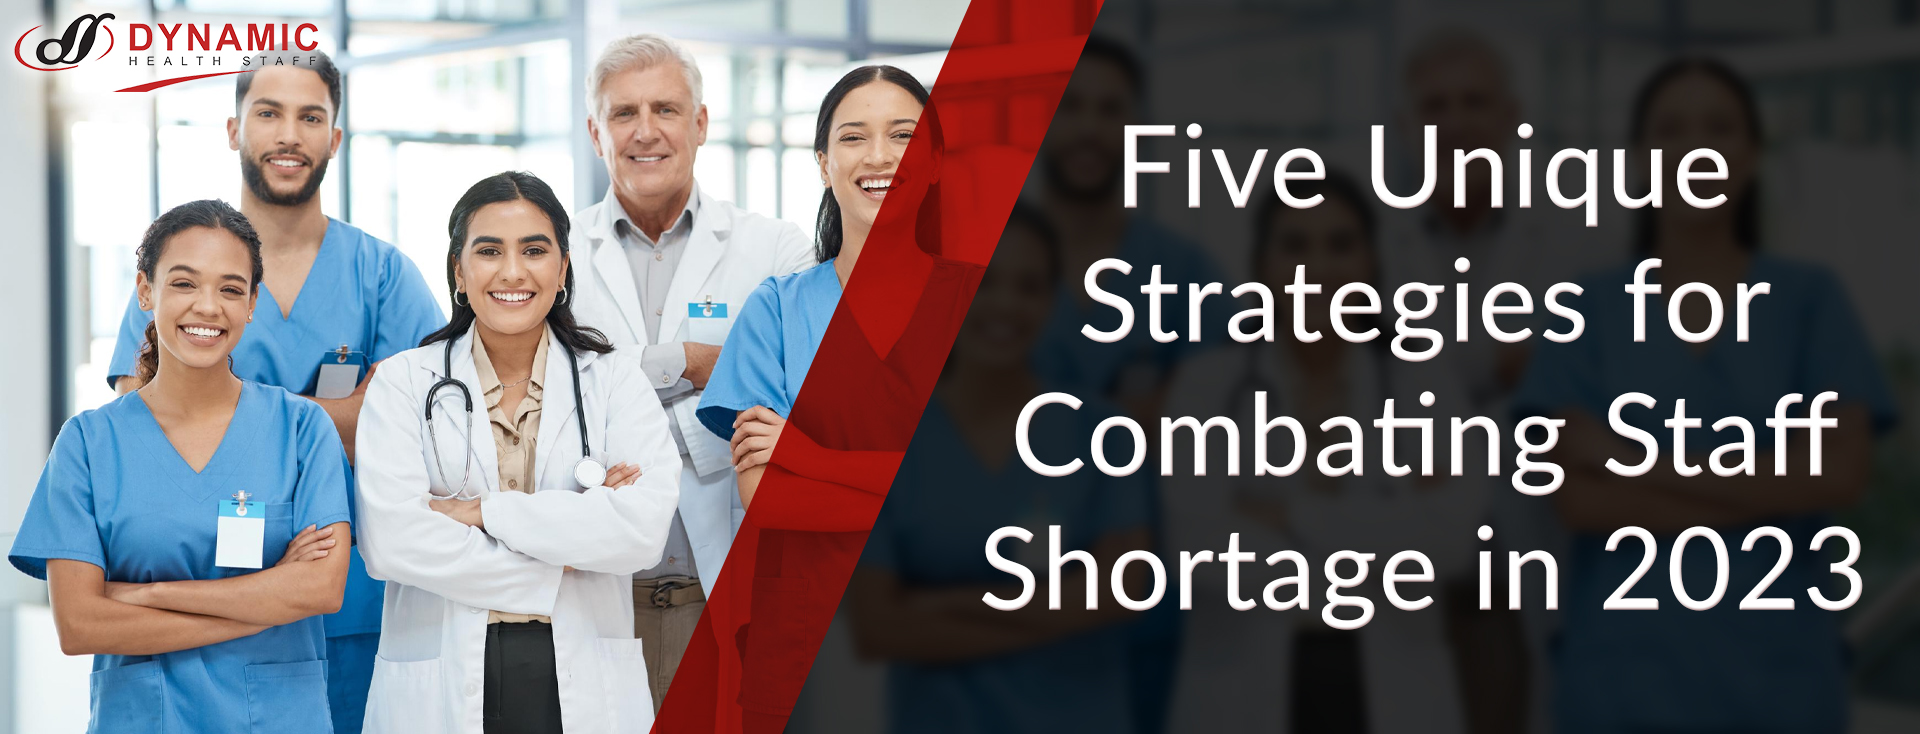 Five Unique Strategies for Combating Staff Shortage in 2023 DHS blog banner